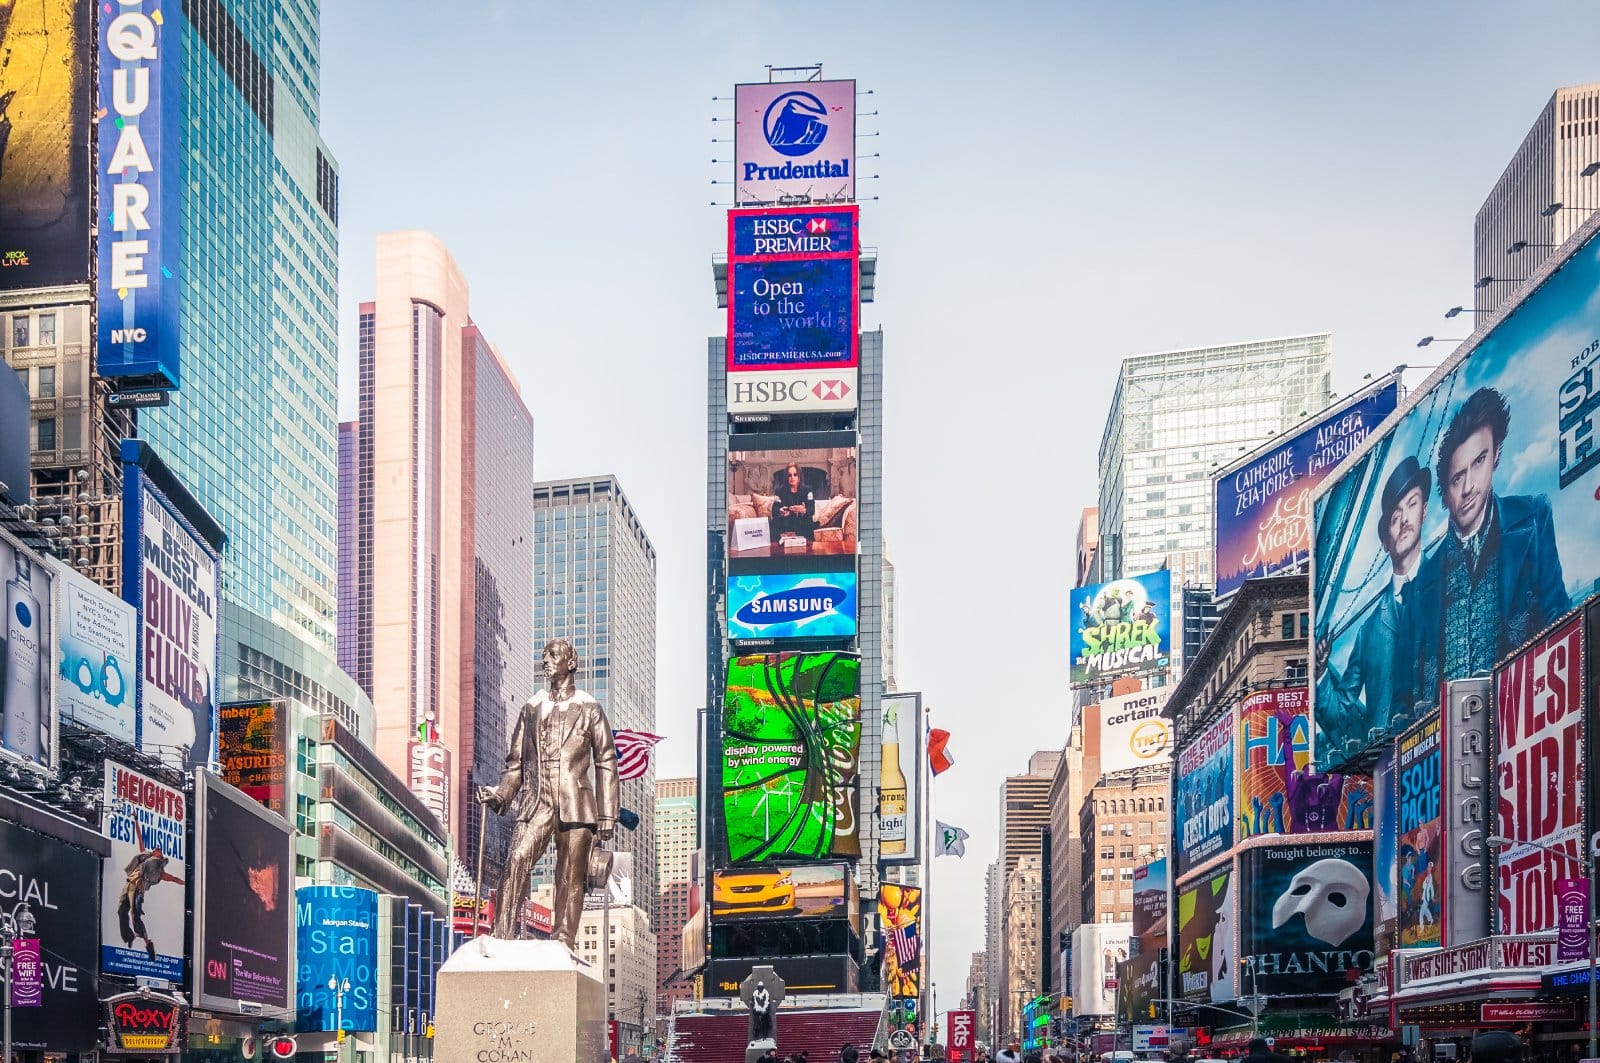 Image Credit: Shutterstock / Anibal Trejo <p>American cities like New York and Las Vegas attract many British tourists, but their reputation for binge drinking and rowdiness can sometimes lead to negative stereotypes.</p>